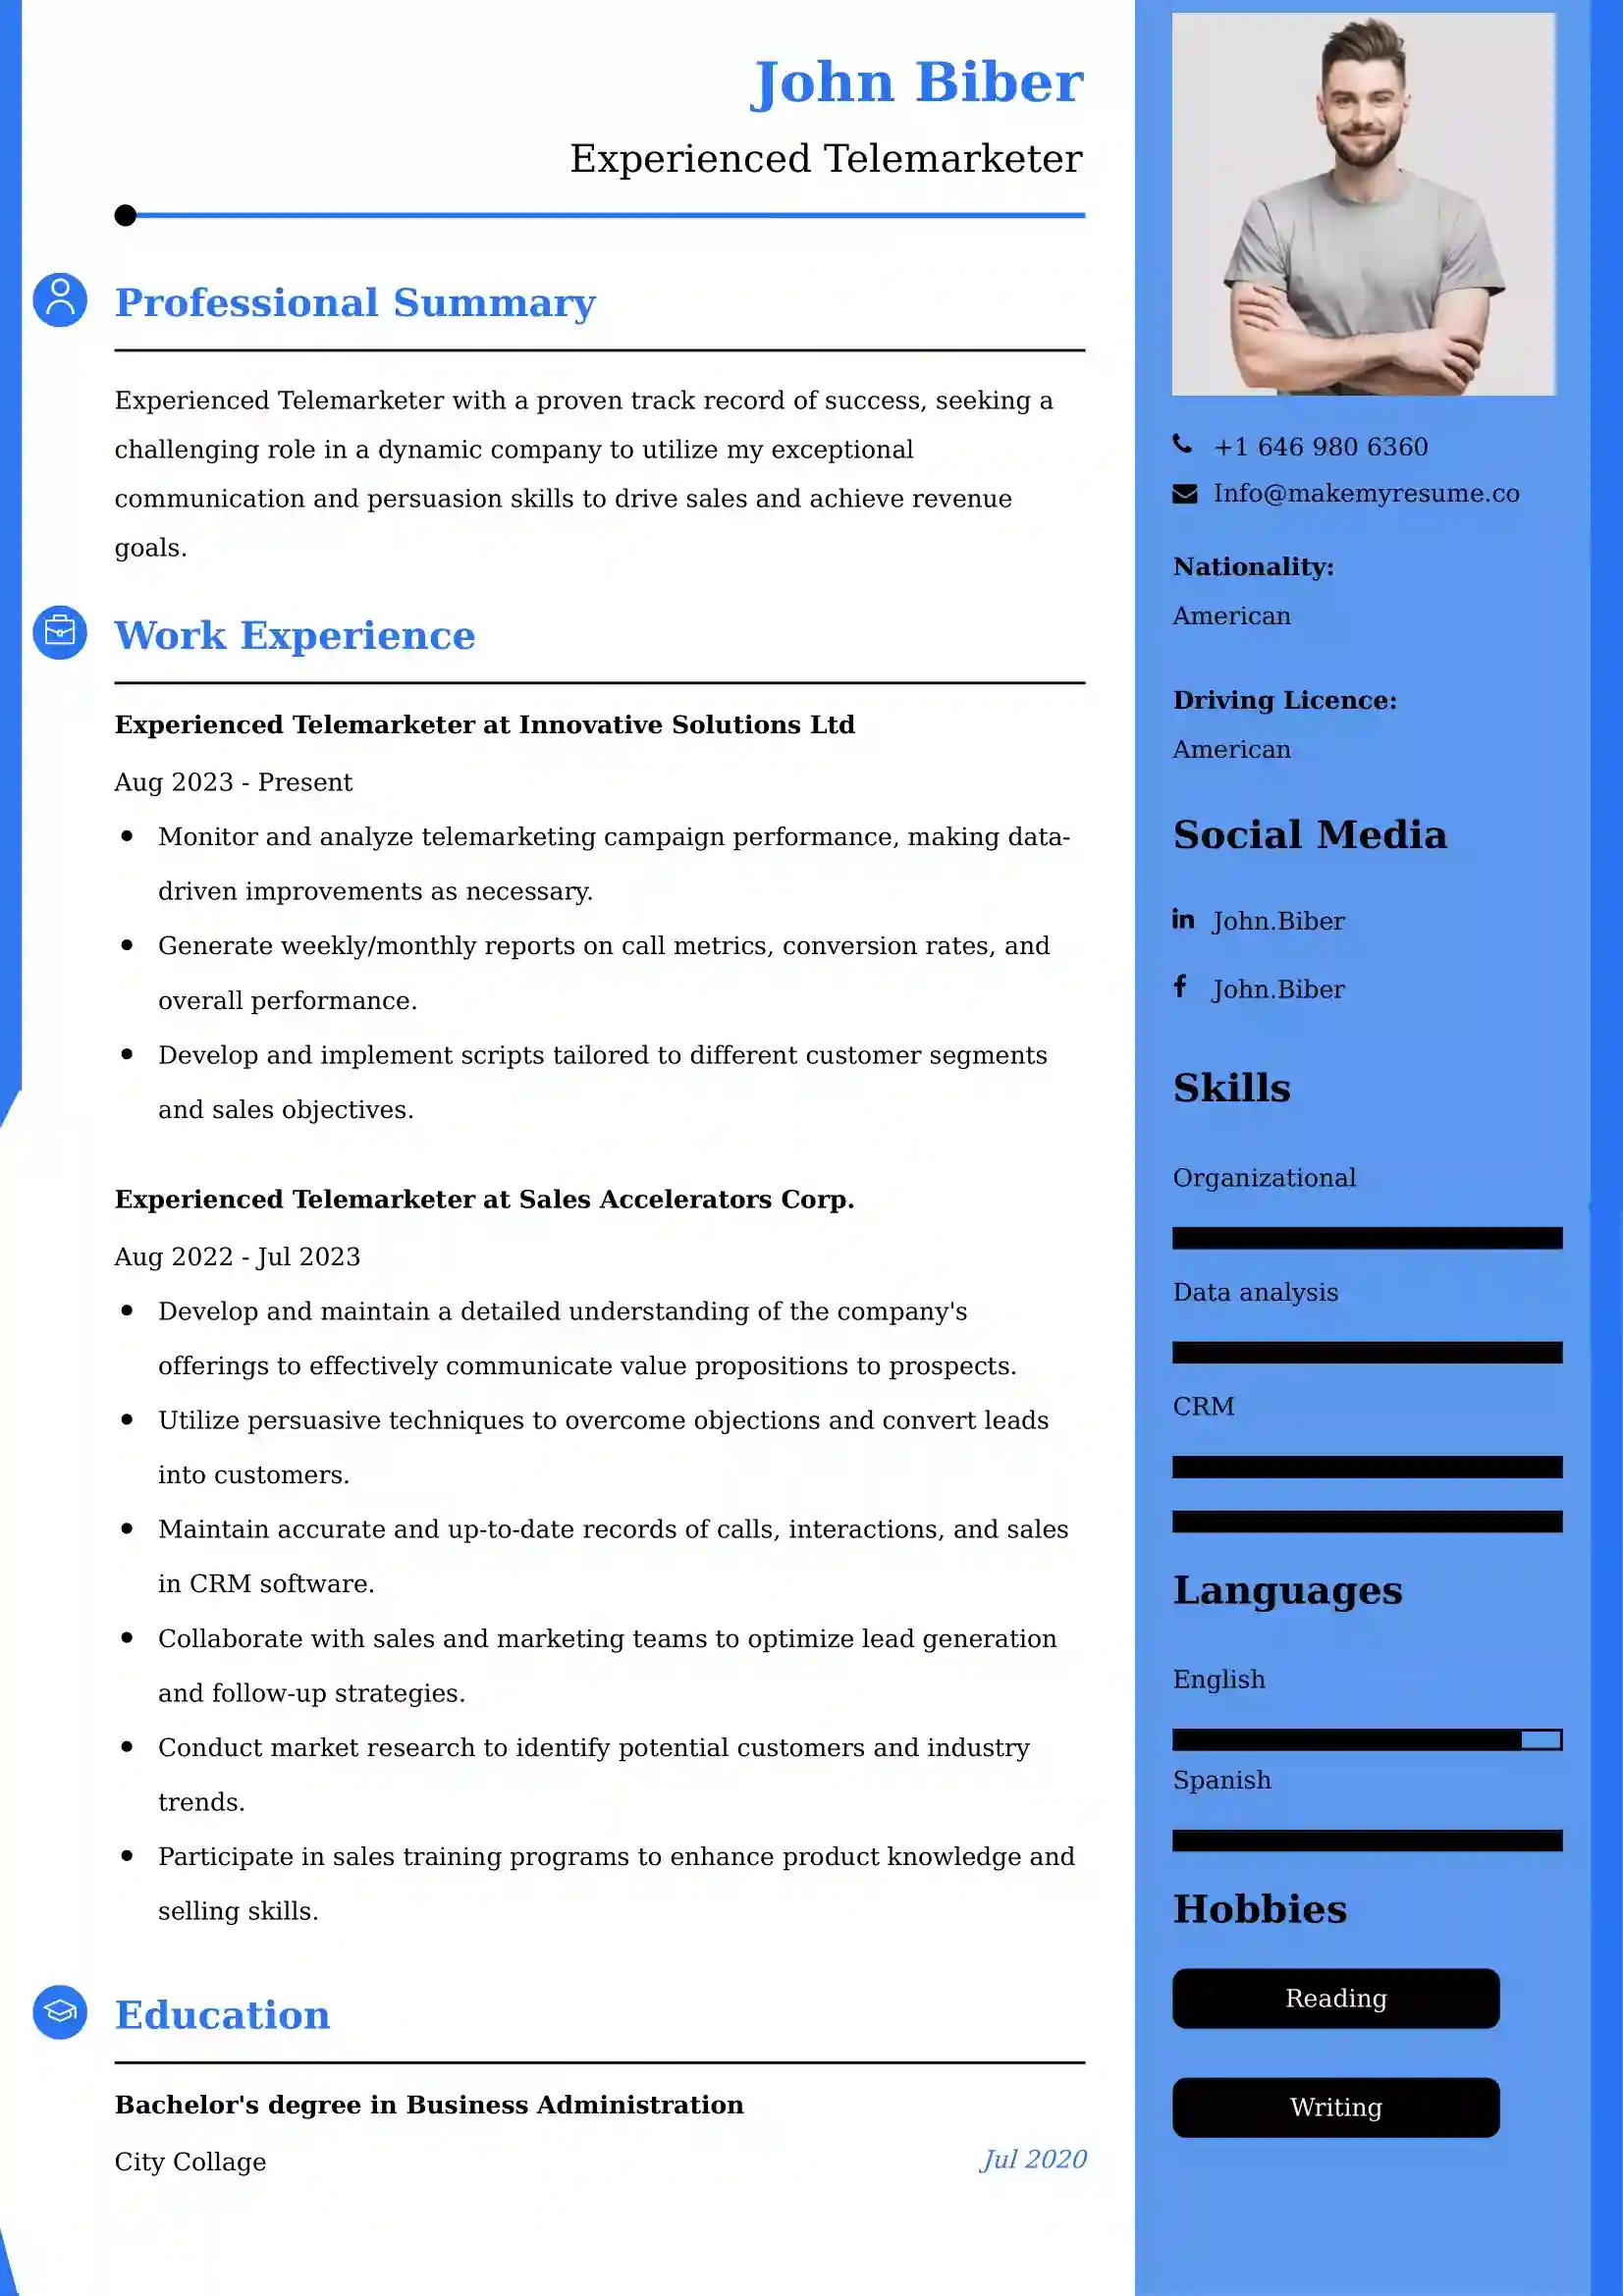 Experienced Telemarketer Resume Examples for UAE